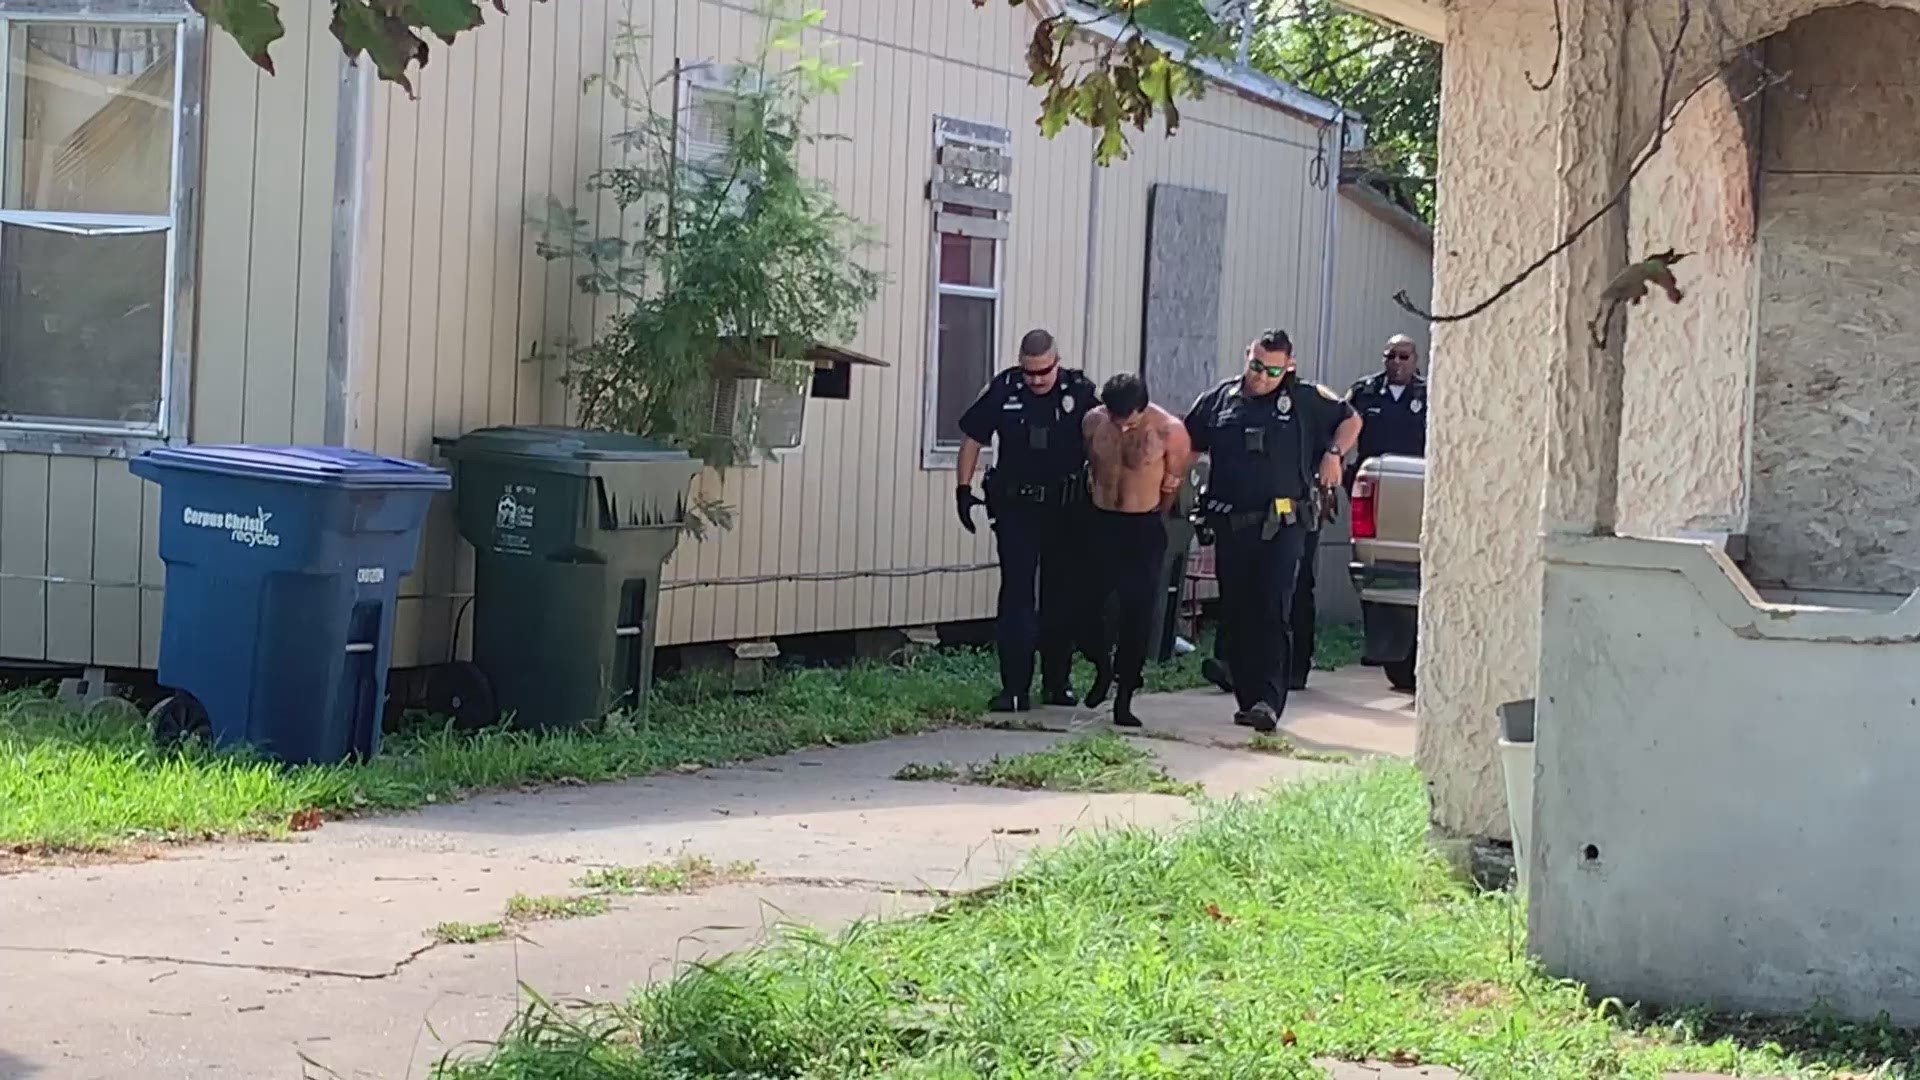 Police were led on a short chase through a neighborhood in Corpus Christi's westside Wednesday after receiving a disturbance call in the 4000 block of Pueblo Street.